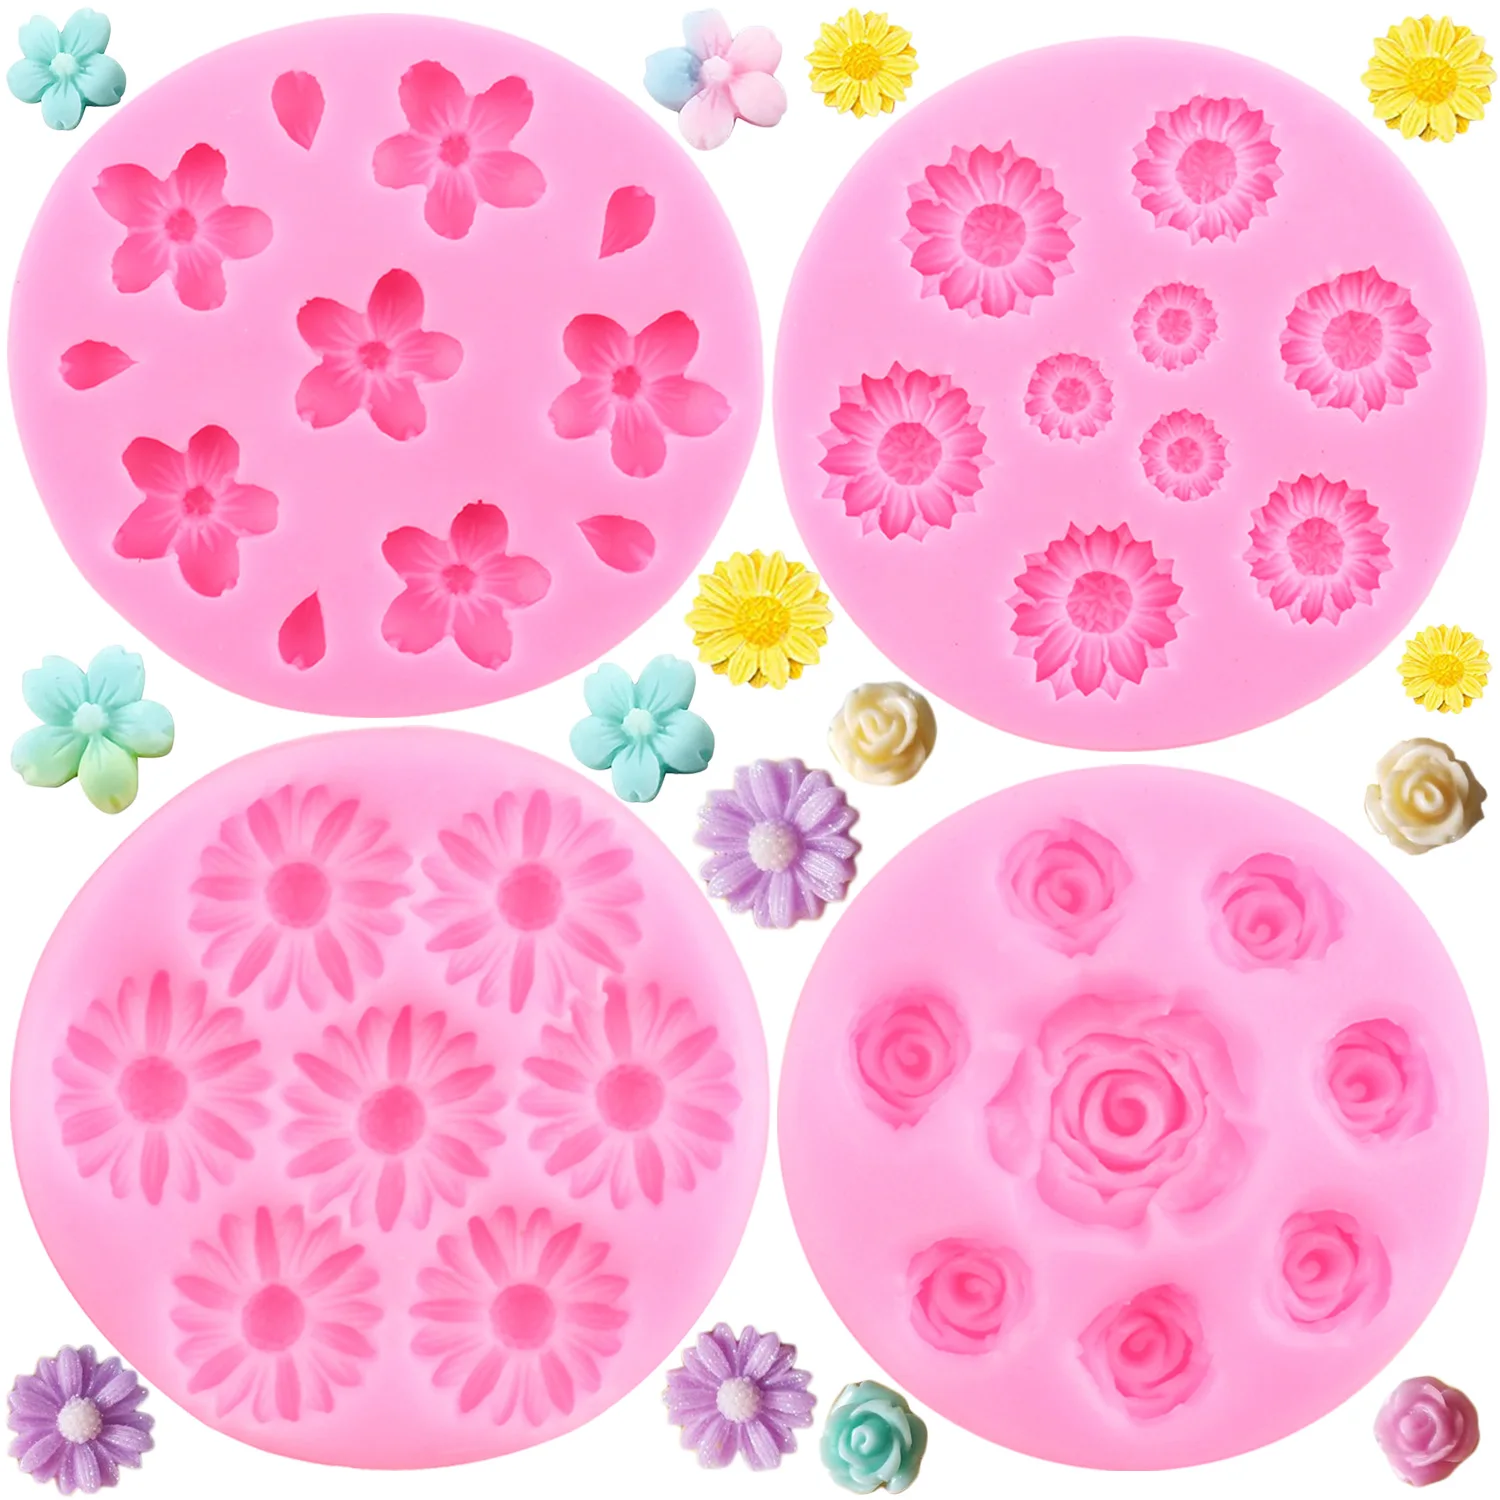 

3D Daisy Flower Silicone Molds Fondant Craft Cake Candy Resin Clay Chocolate Mould DIY Sugarcraft Ice Pastry Baking Tools